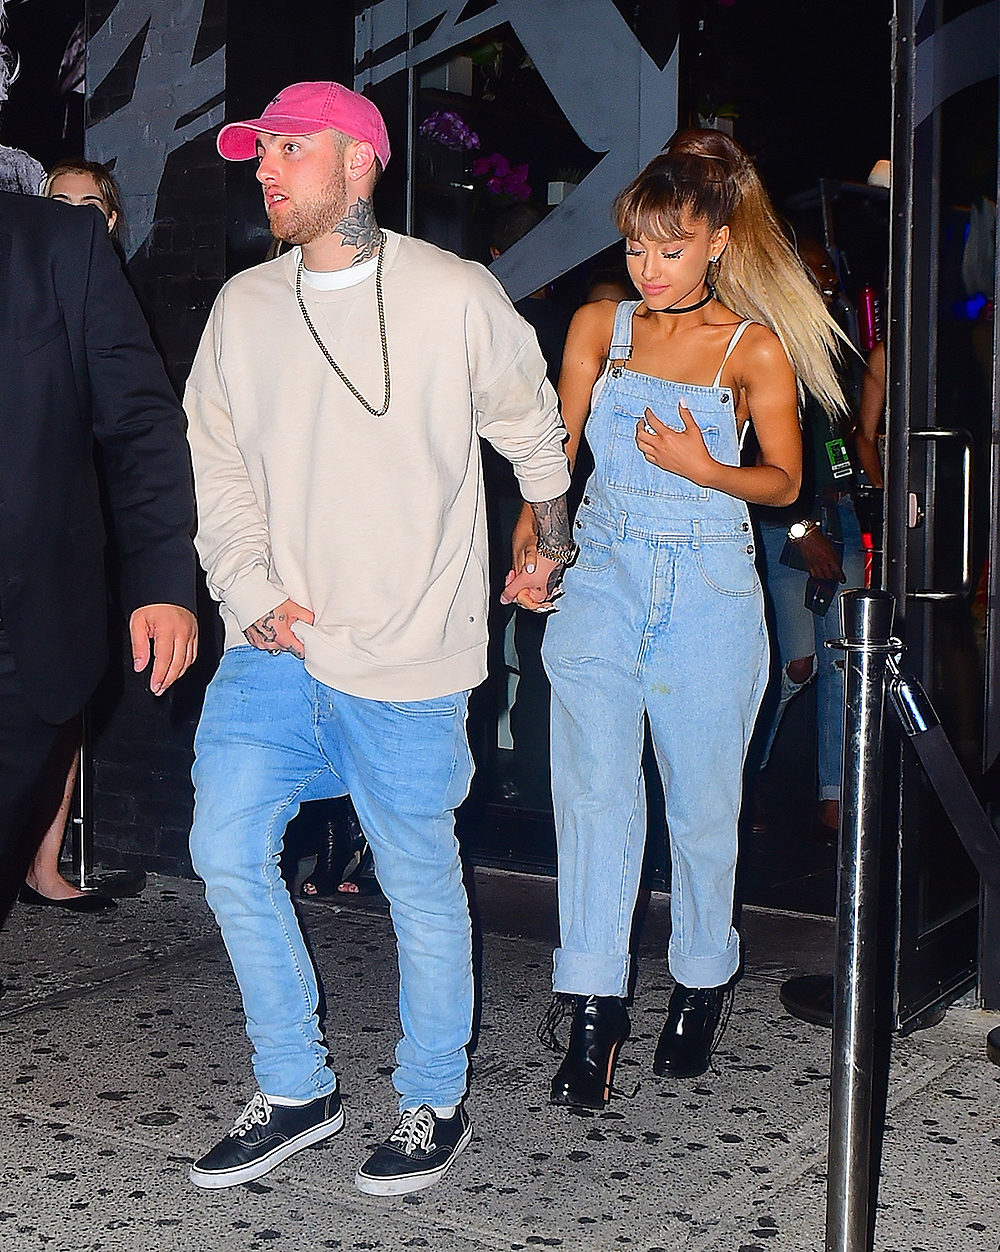 Ariana Grande and her new boyfriend, Mac Miller, were spotted leaving the Republic Records VMA After Party on Sunday night in NYC. The new couple wore matching Denim outfits as they held hands while exiting 